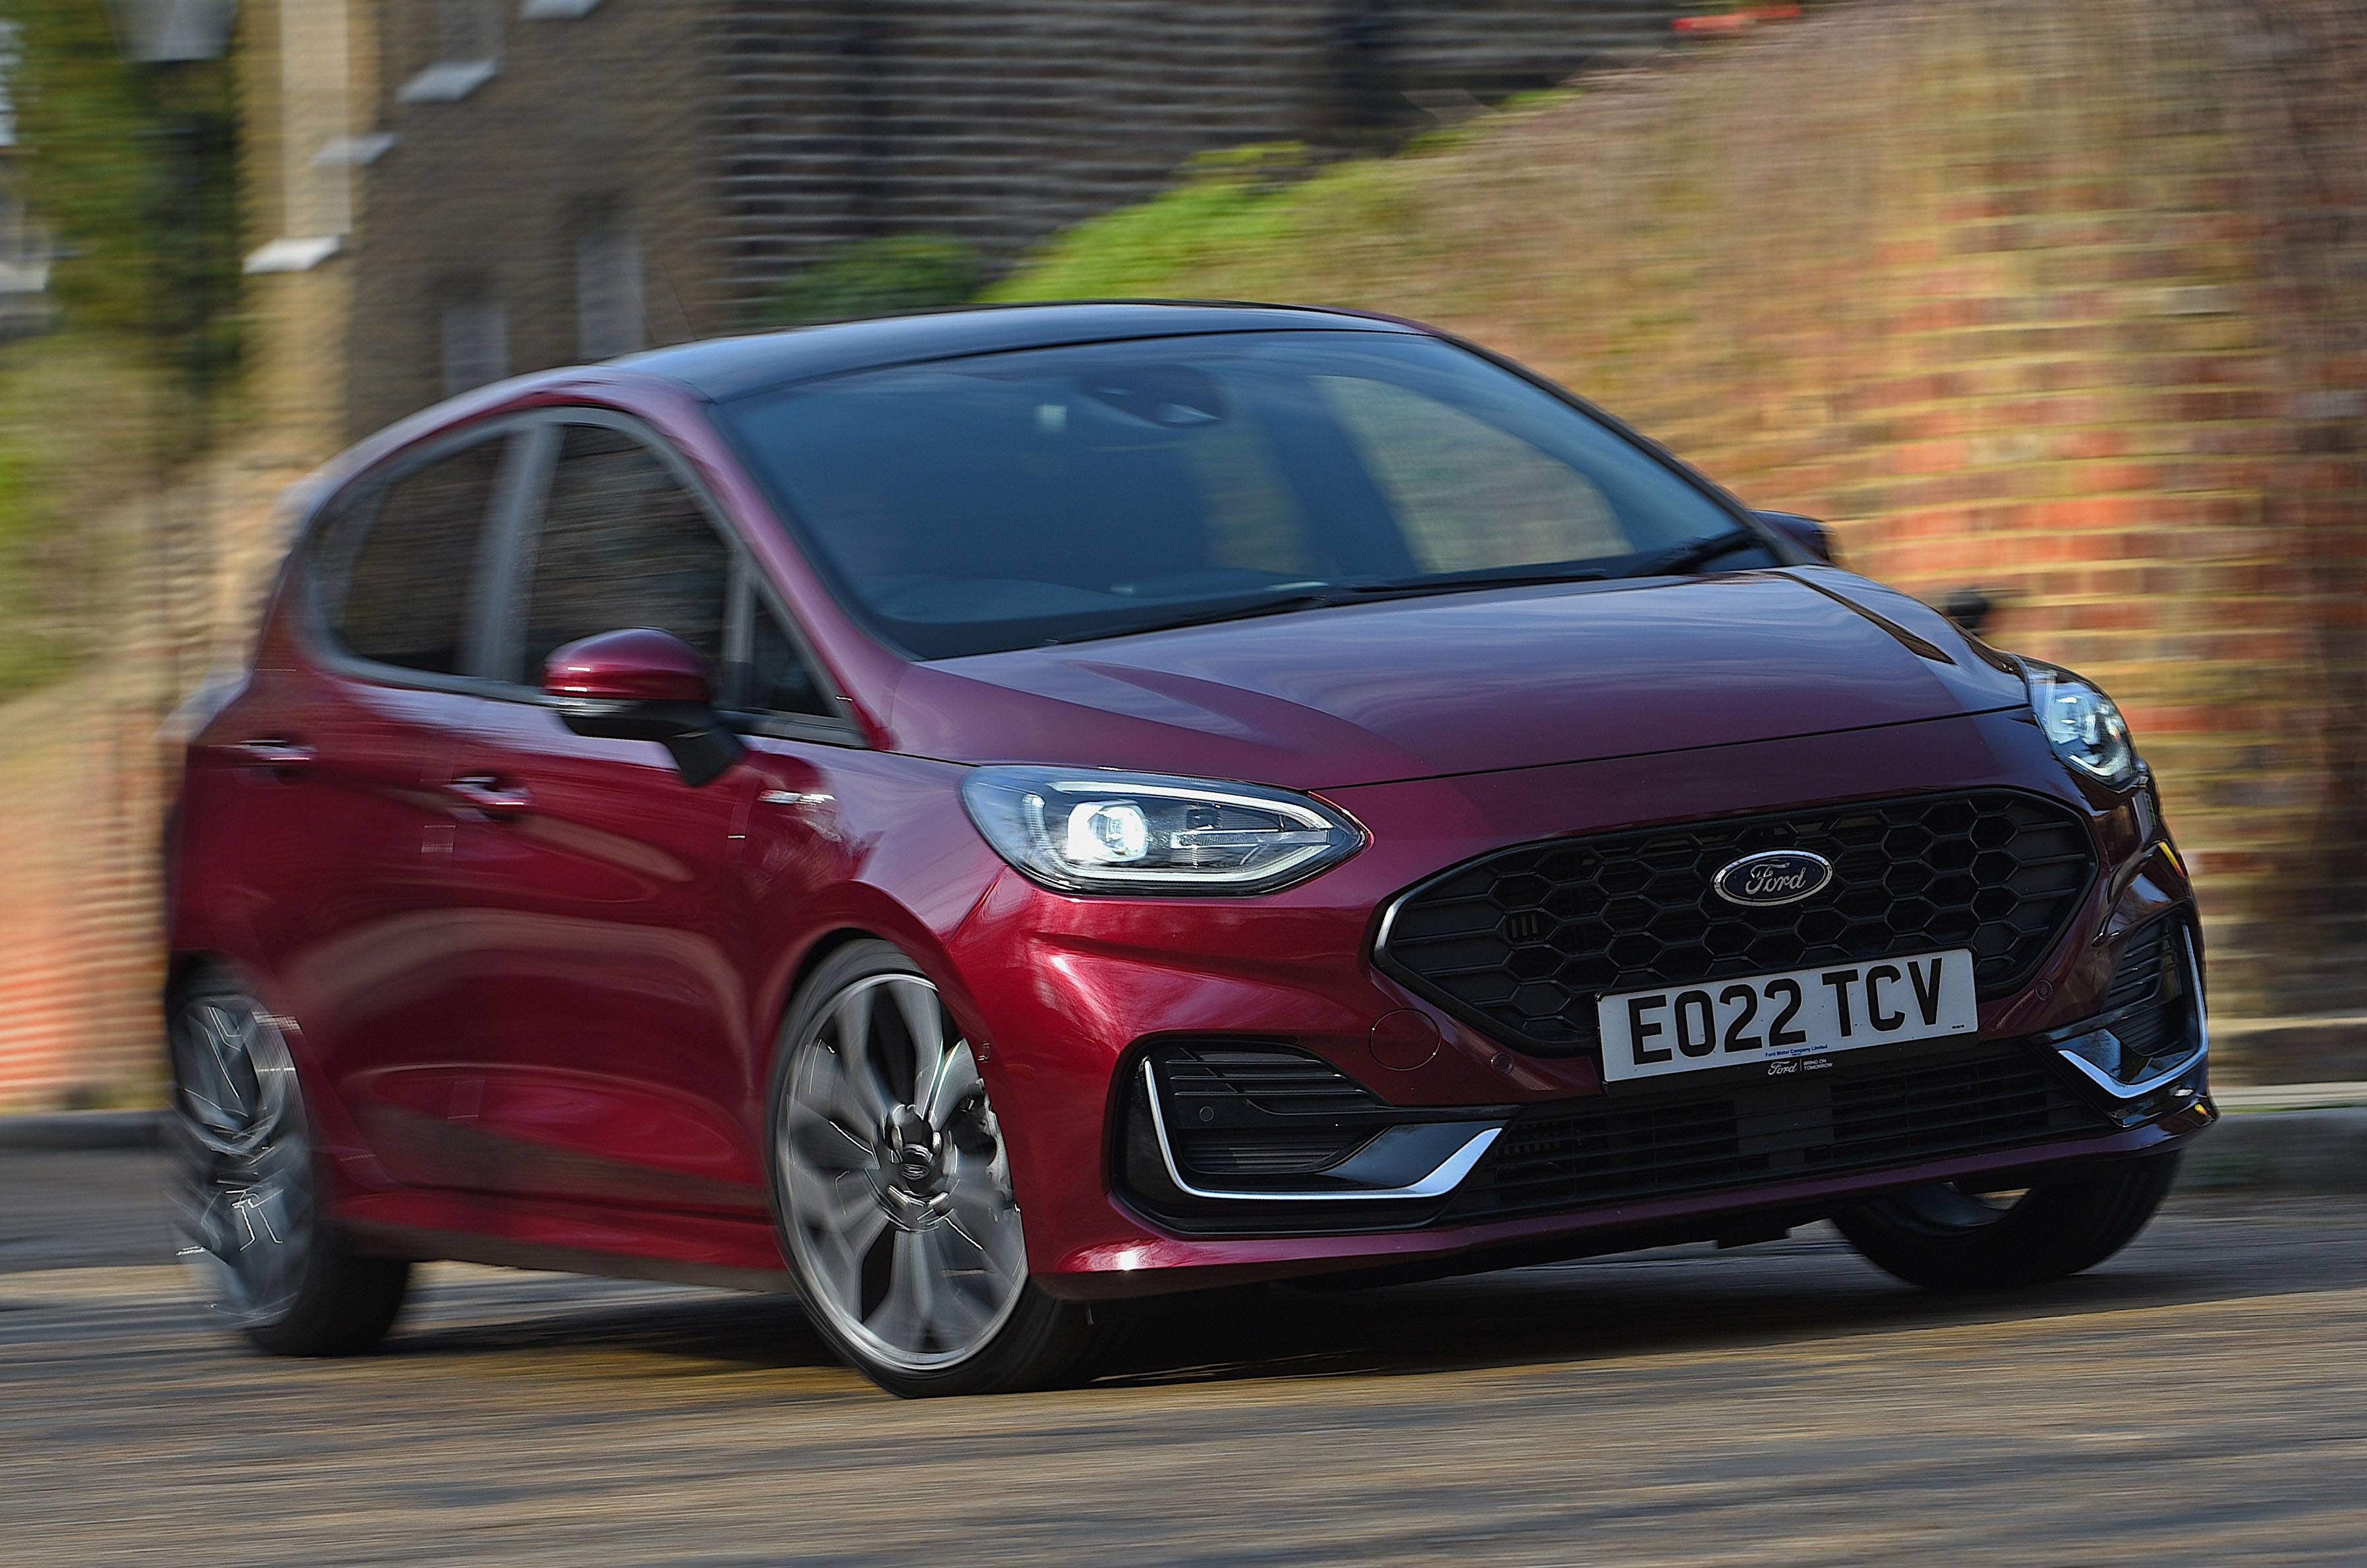 Ford Fiesta production ends after 47 years